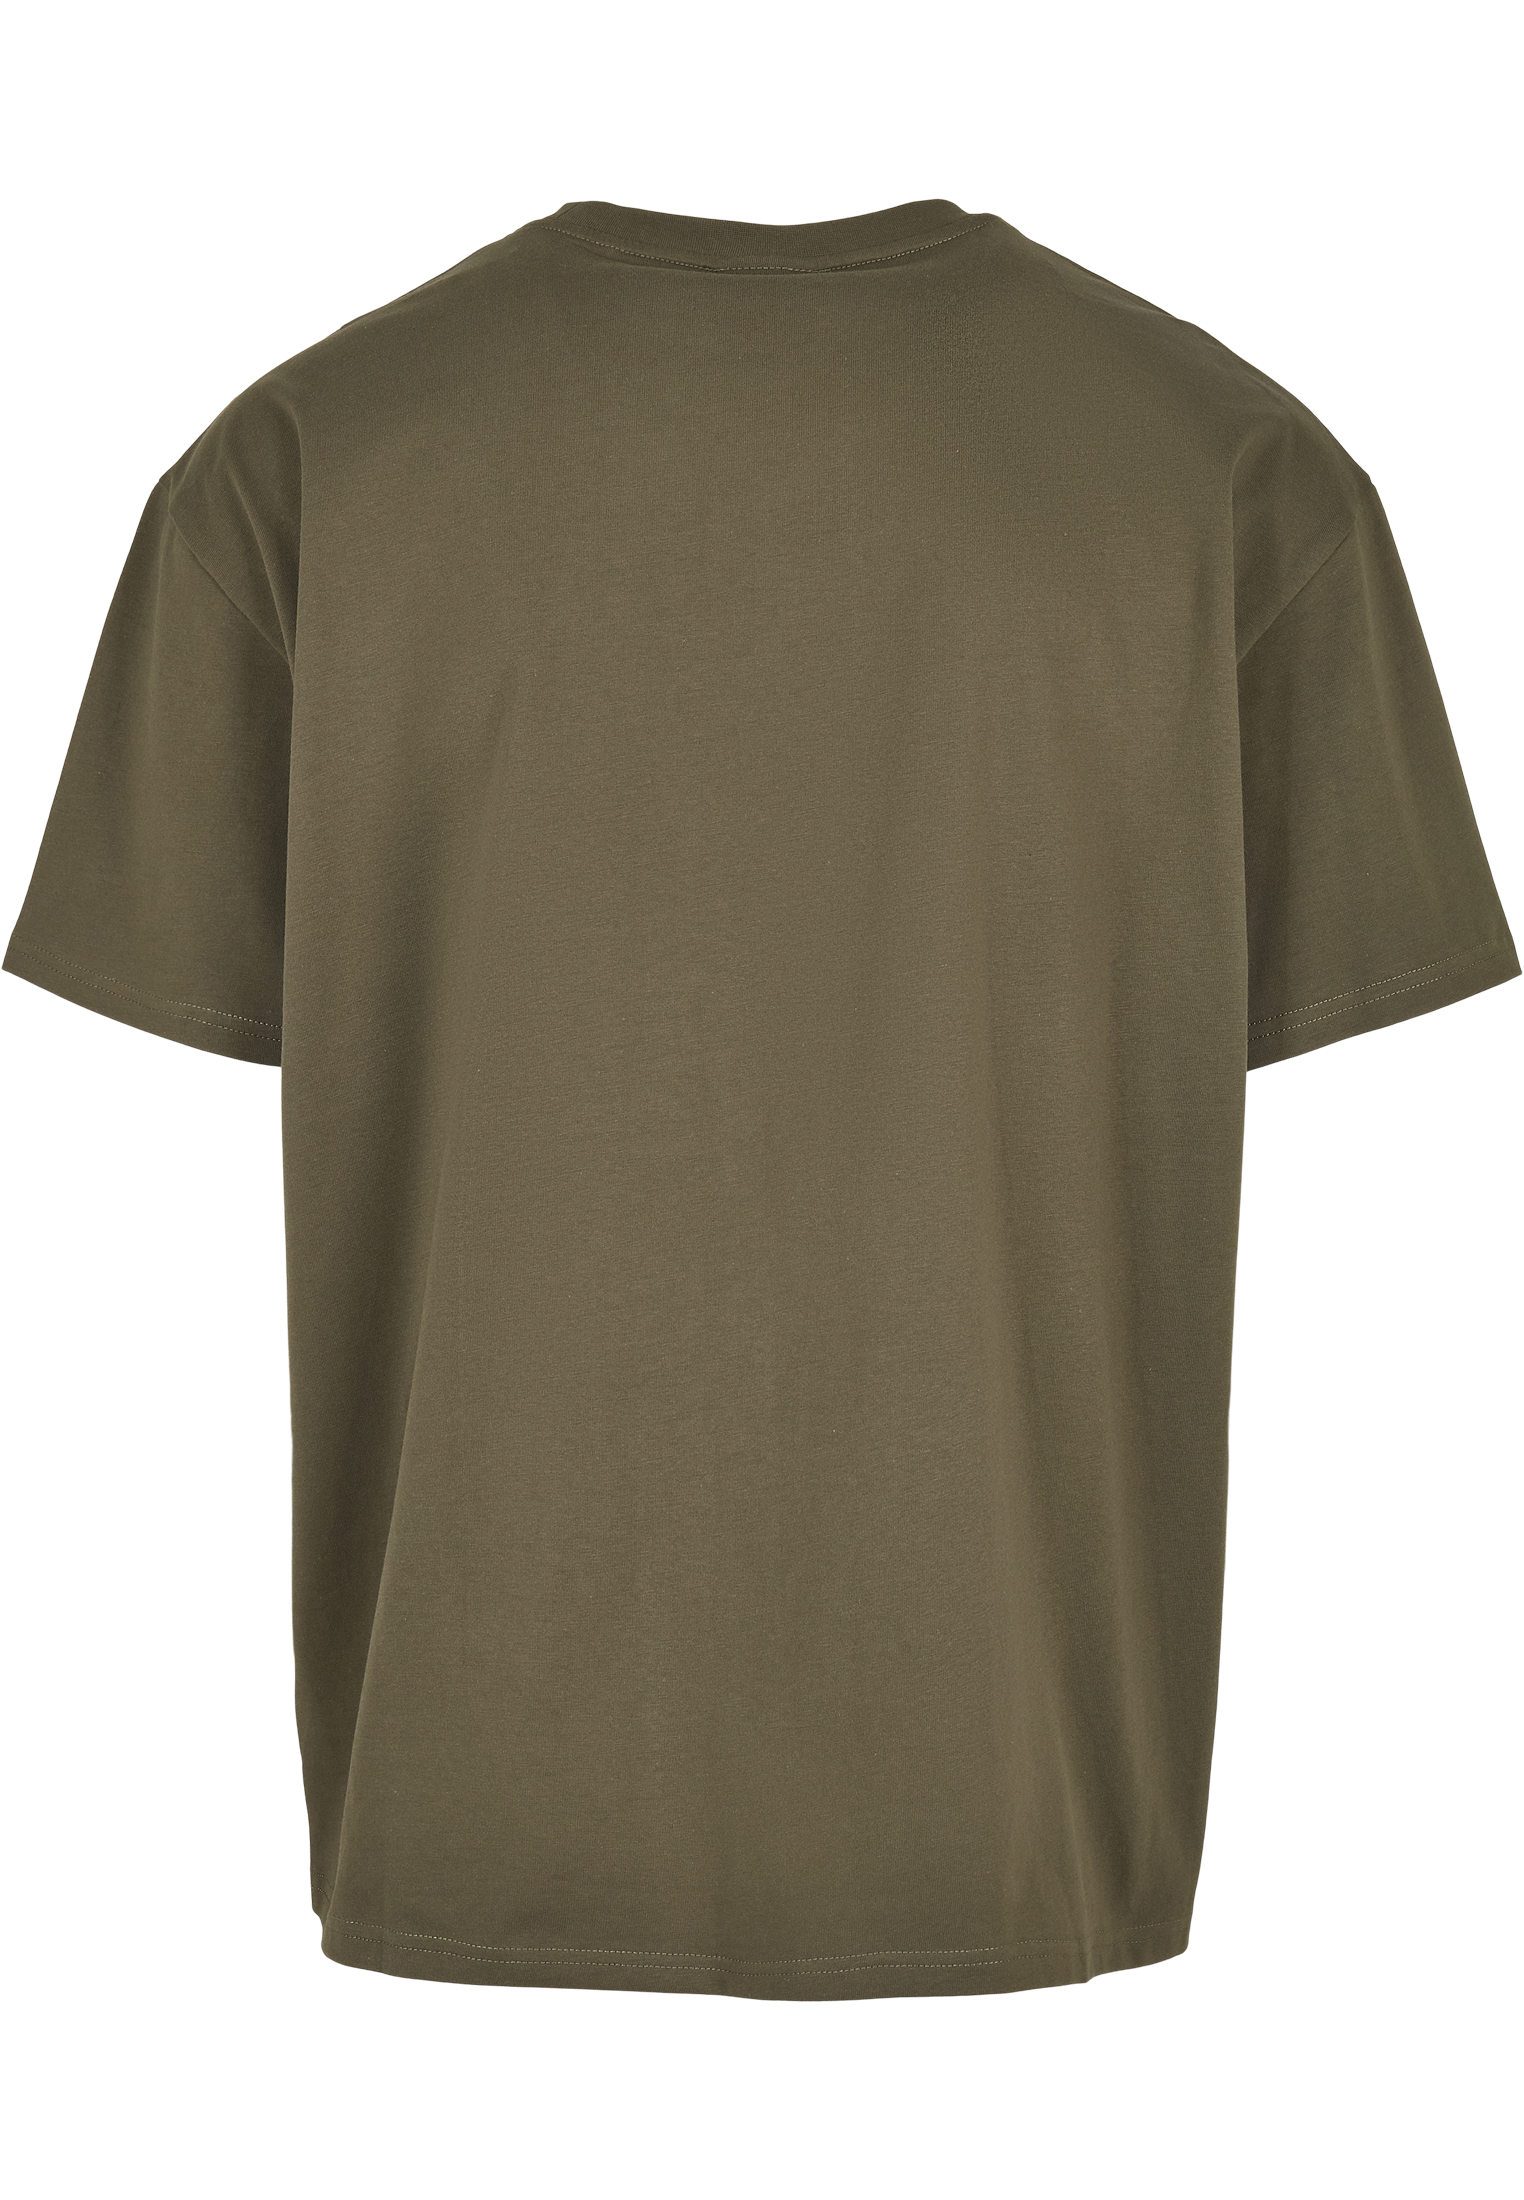 Nos Kollektion Southpole 3D Tee in Farbe olive